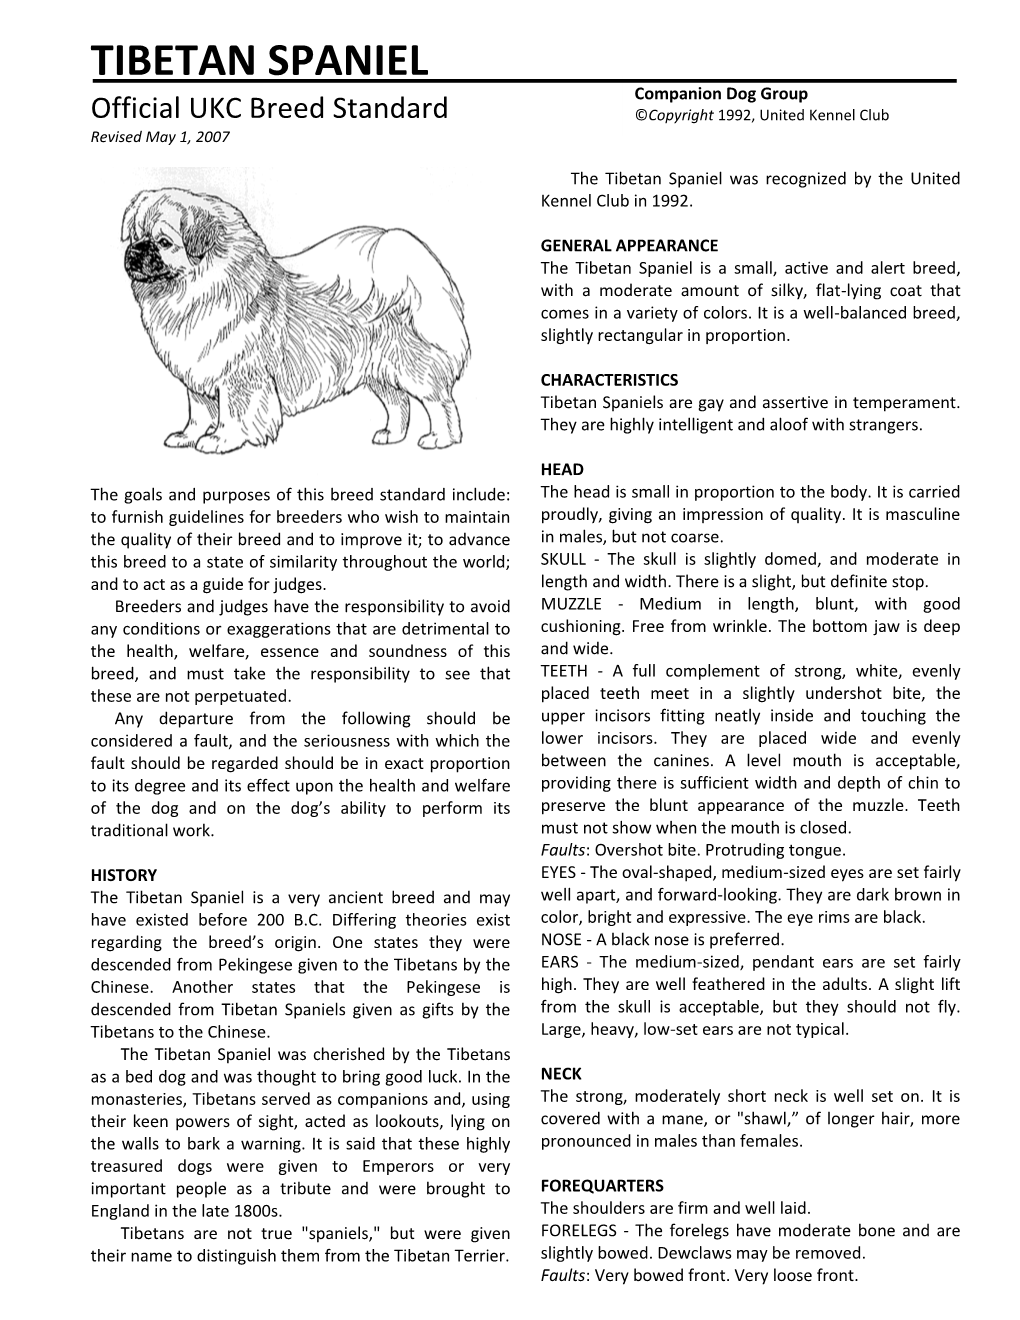 TIBETAN SPANIEL Companion Dog Group Official UKC Breed Standard ©Copyright 1992, United Kennel Club Revised May 1, 2007